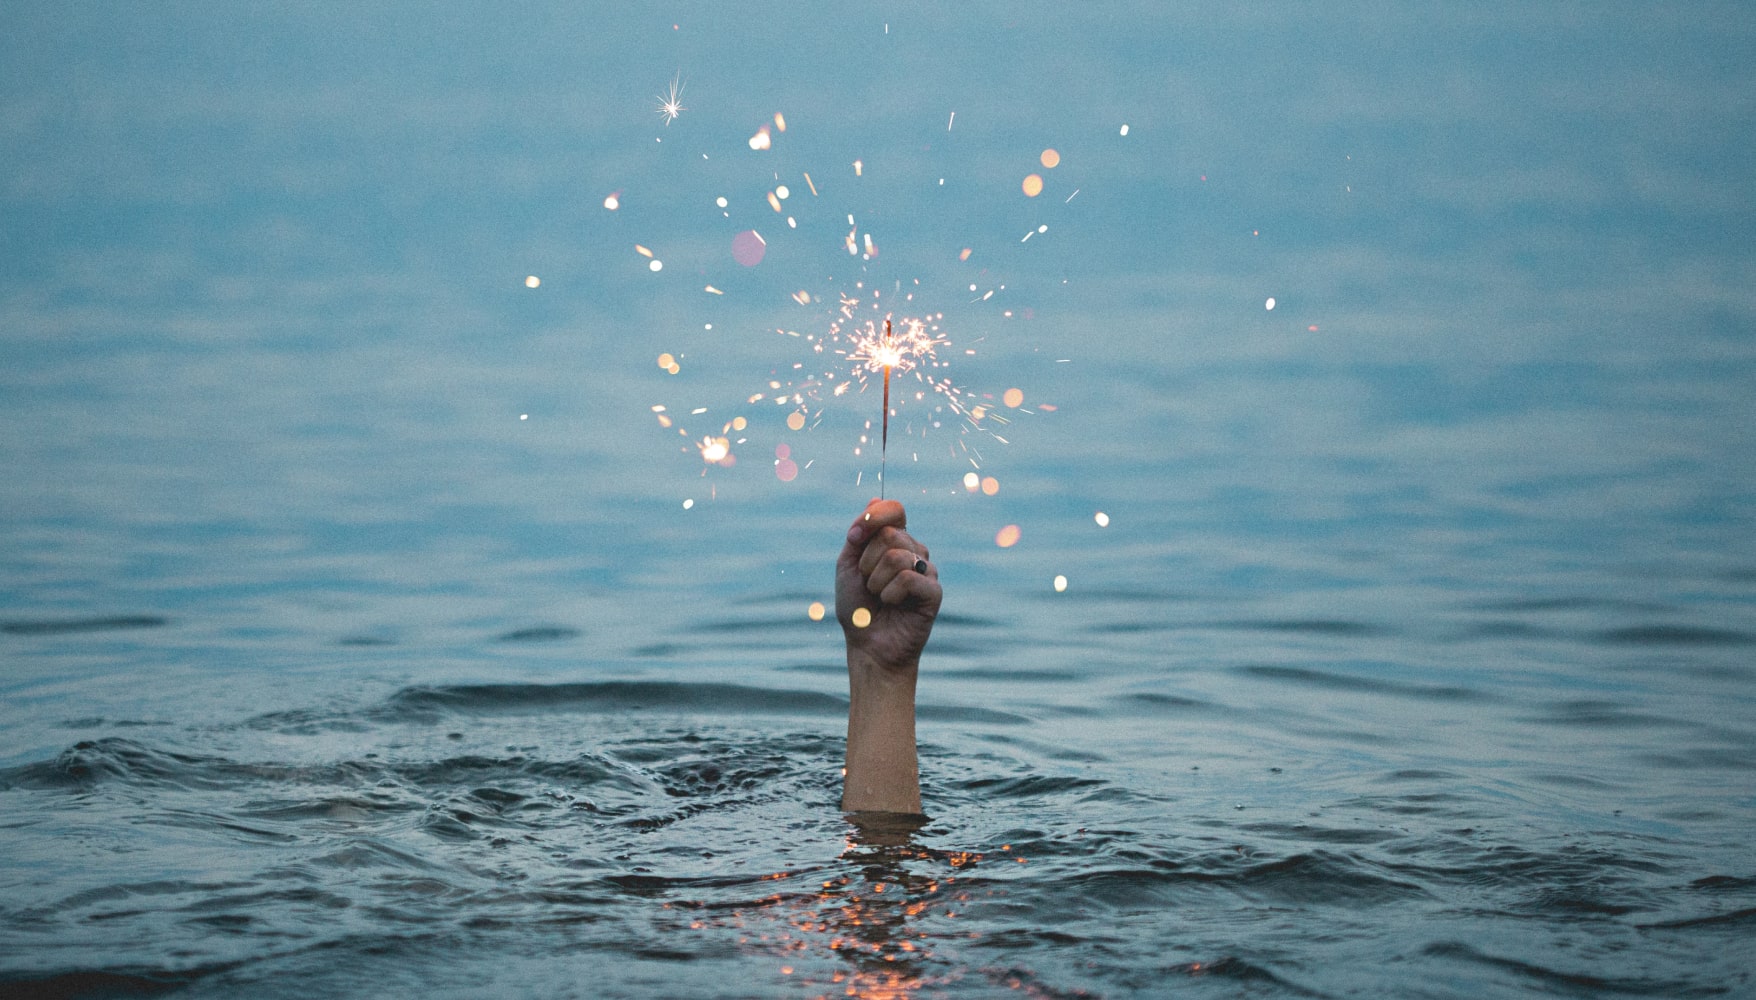 A person drowing in a lake holding sparklers as they drown